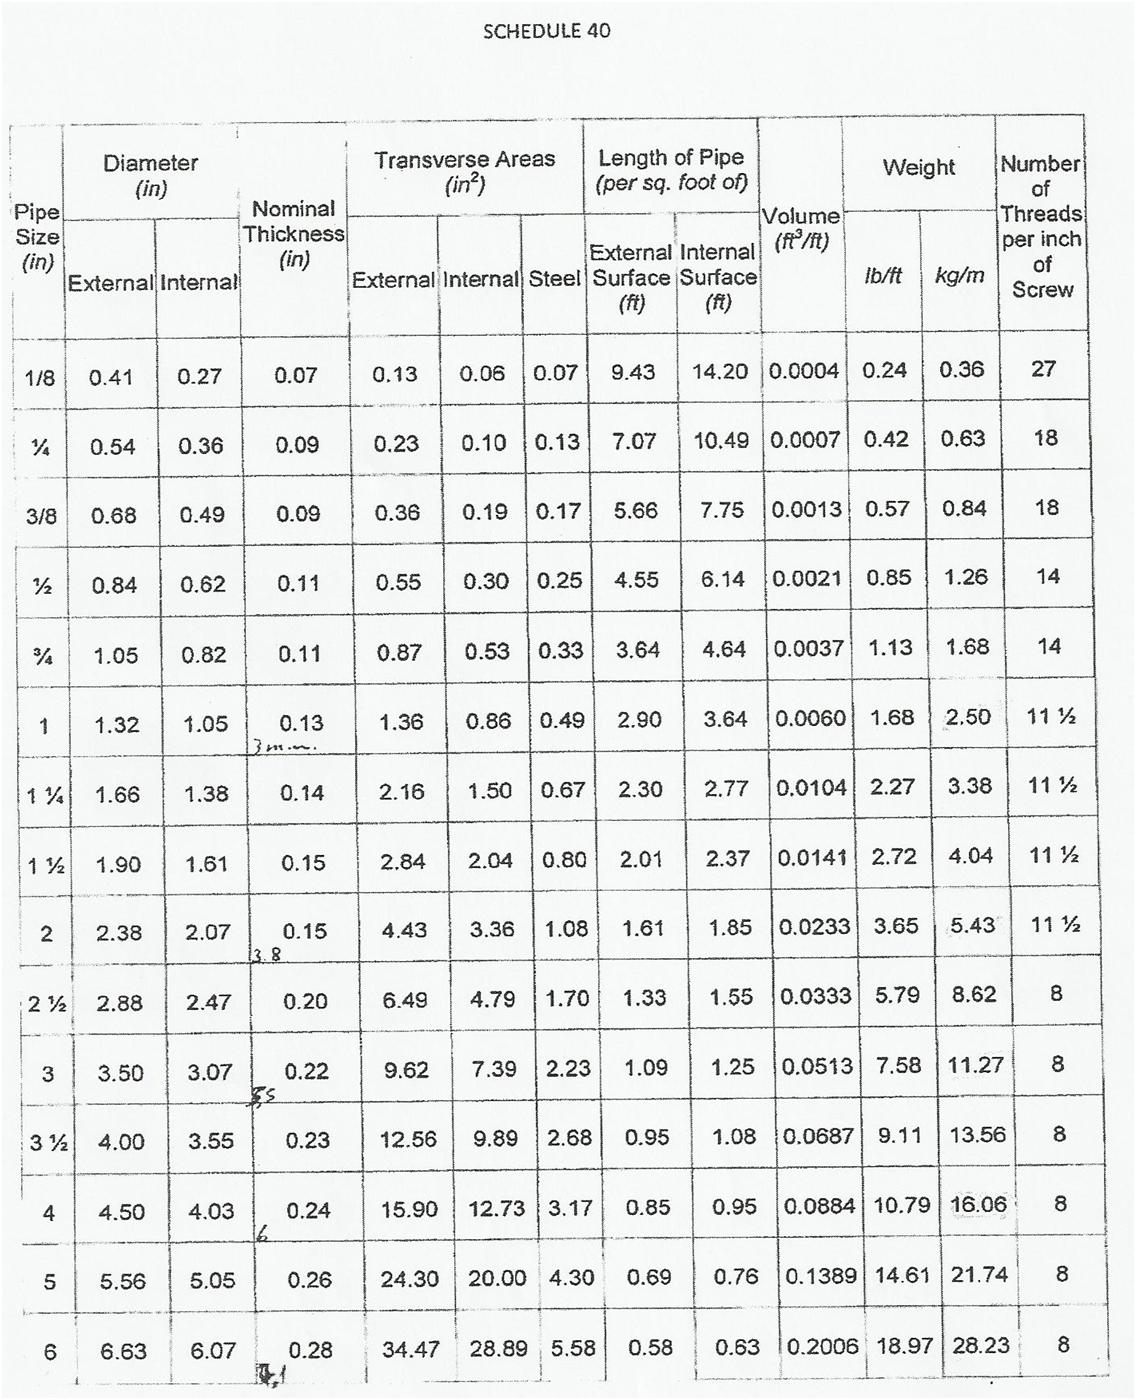 UNIT WEIGHT OF MS PIPE SCHEDULE 40 | CIVIL ENGINEER'S DIARY